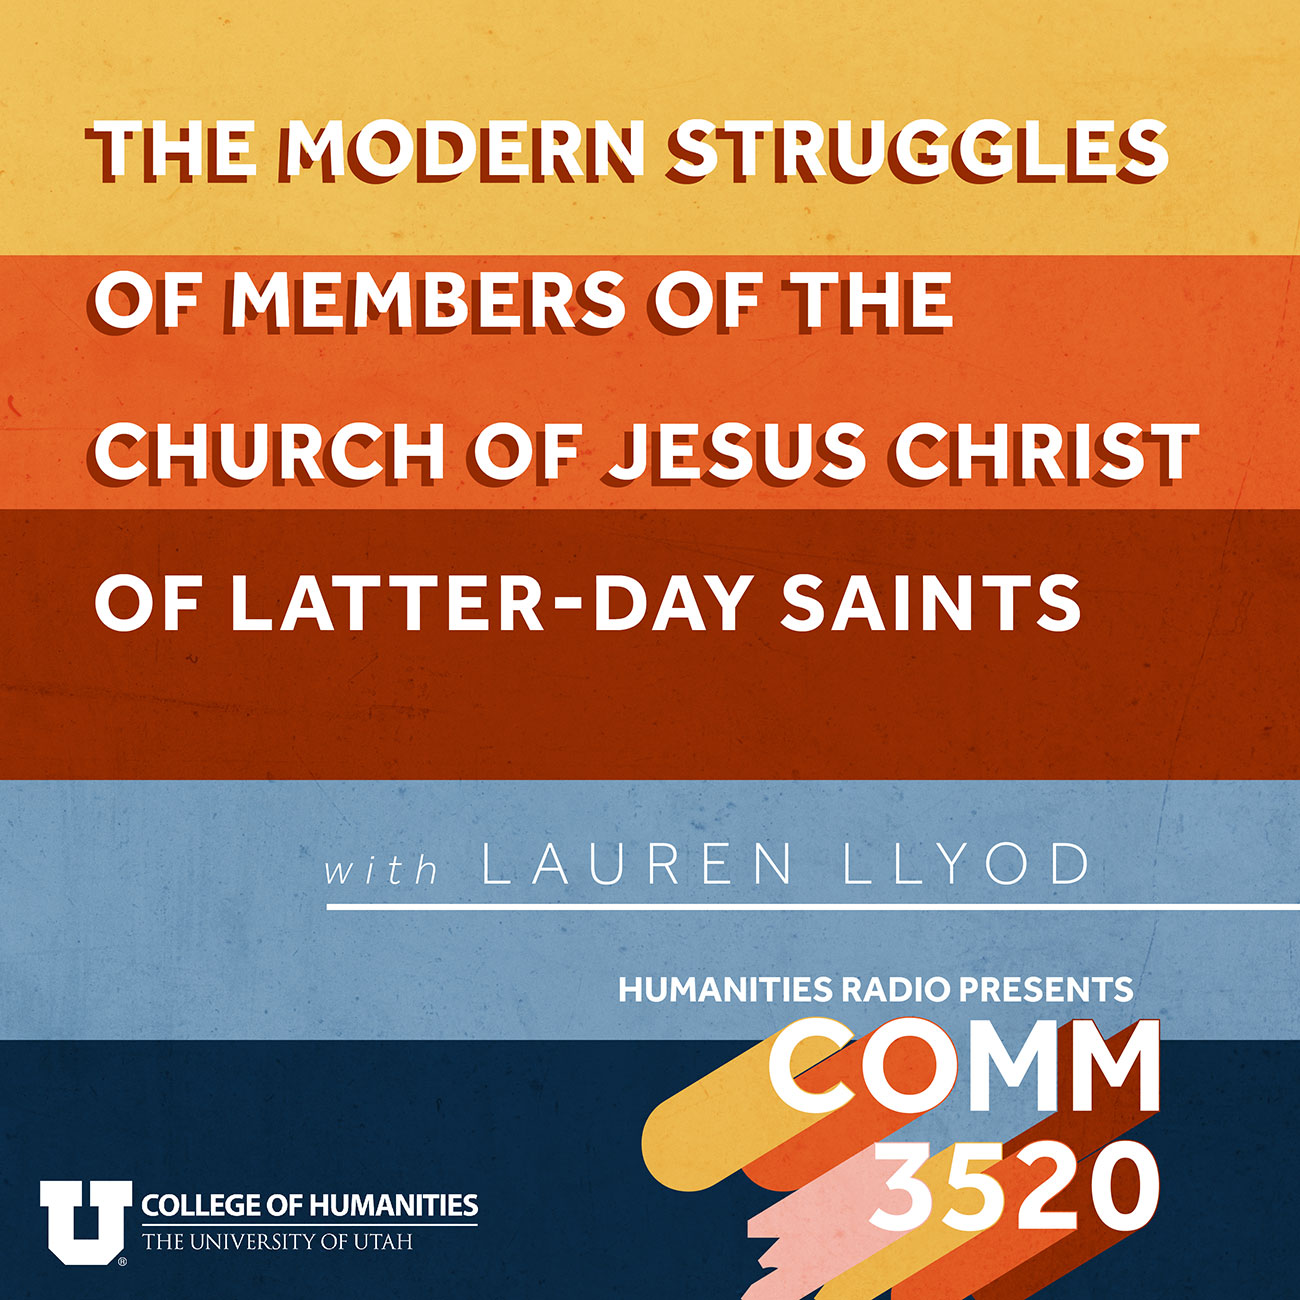 The modern struggles of members of the Church of Jesus Christ of Latter-Day Saints